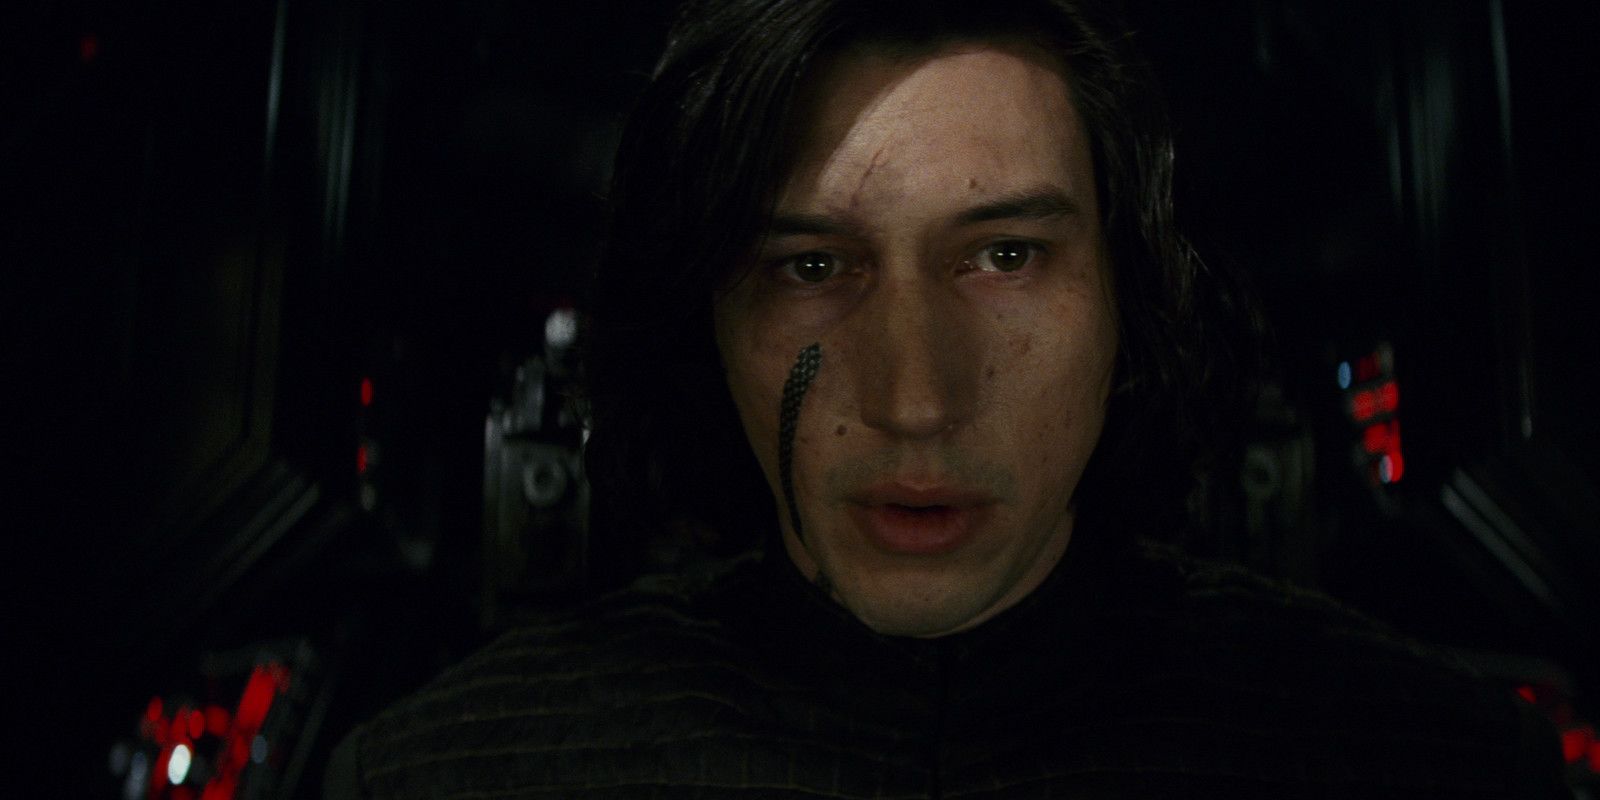 Star Wars: What's On Kylo Ren's Face in The Last Jedi Trailer?